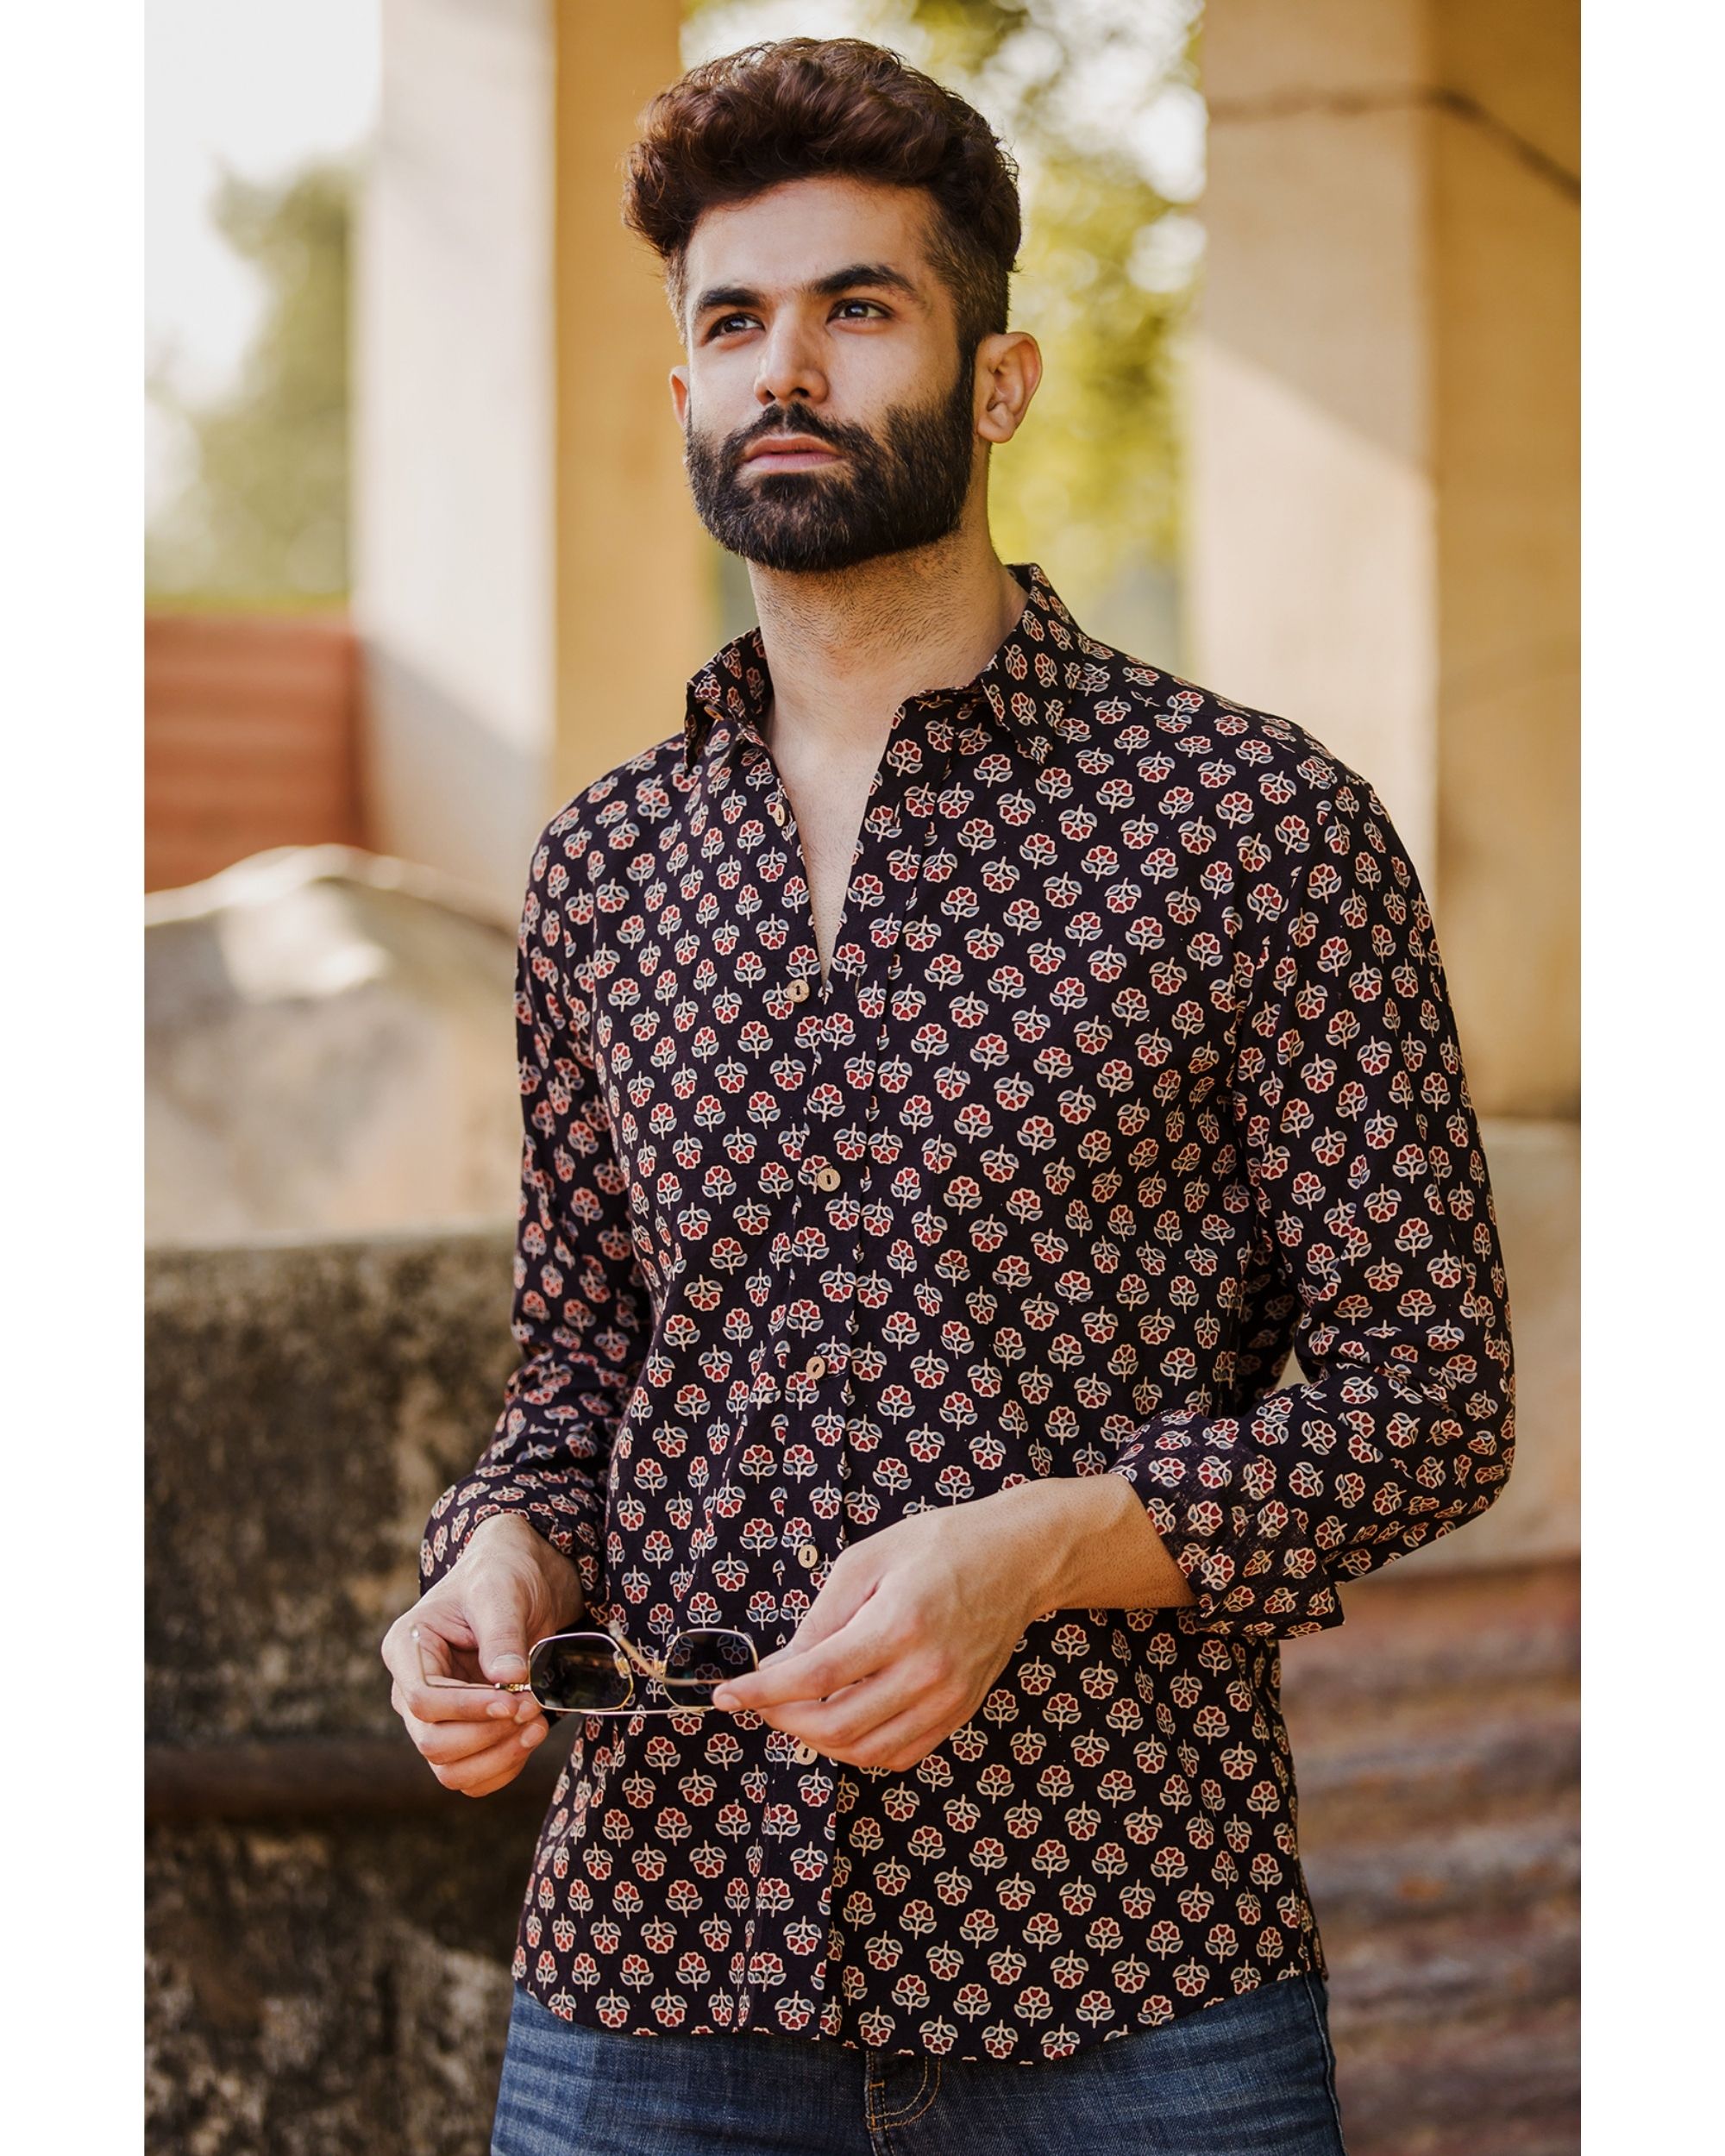 Black and red ajrakh motif printed shirt by Prints Valley